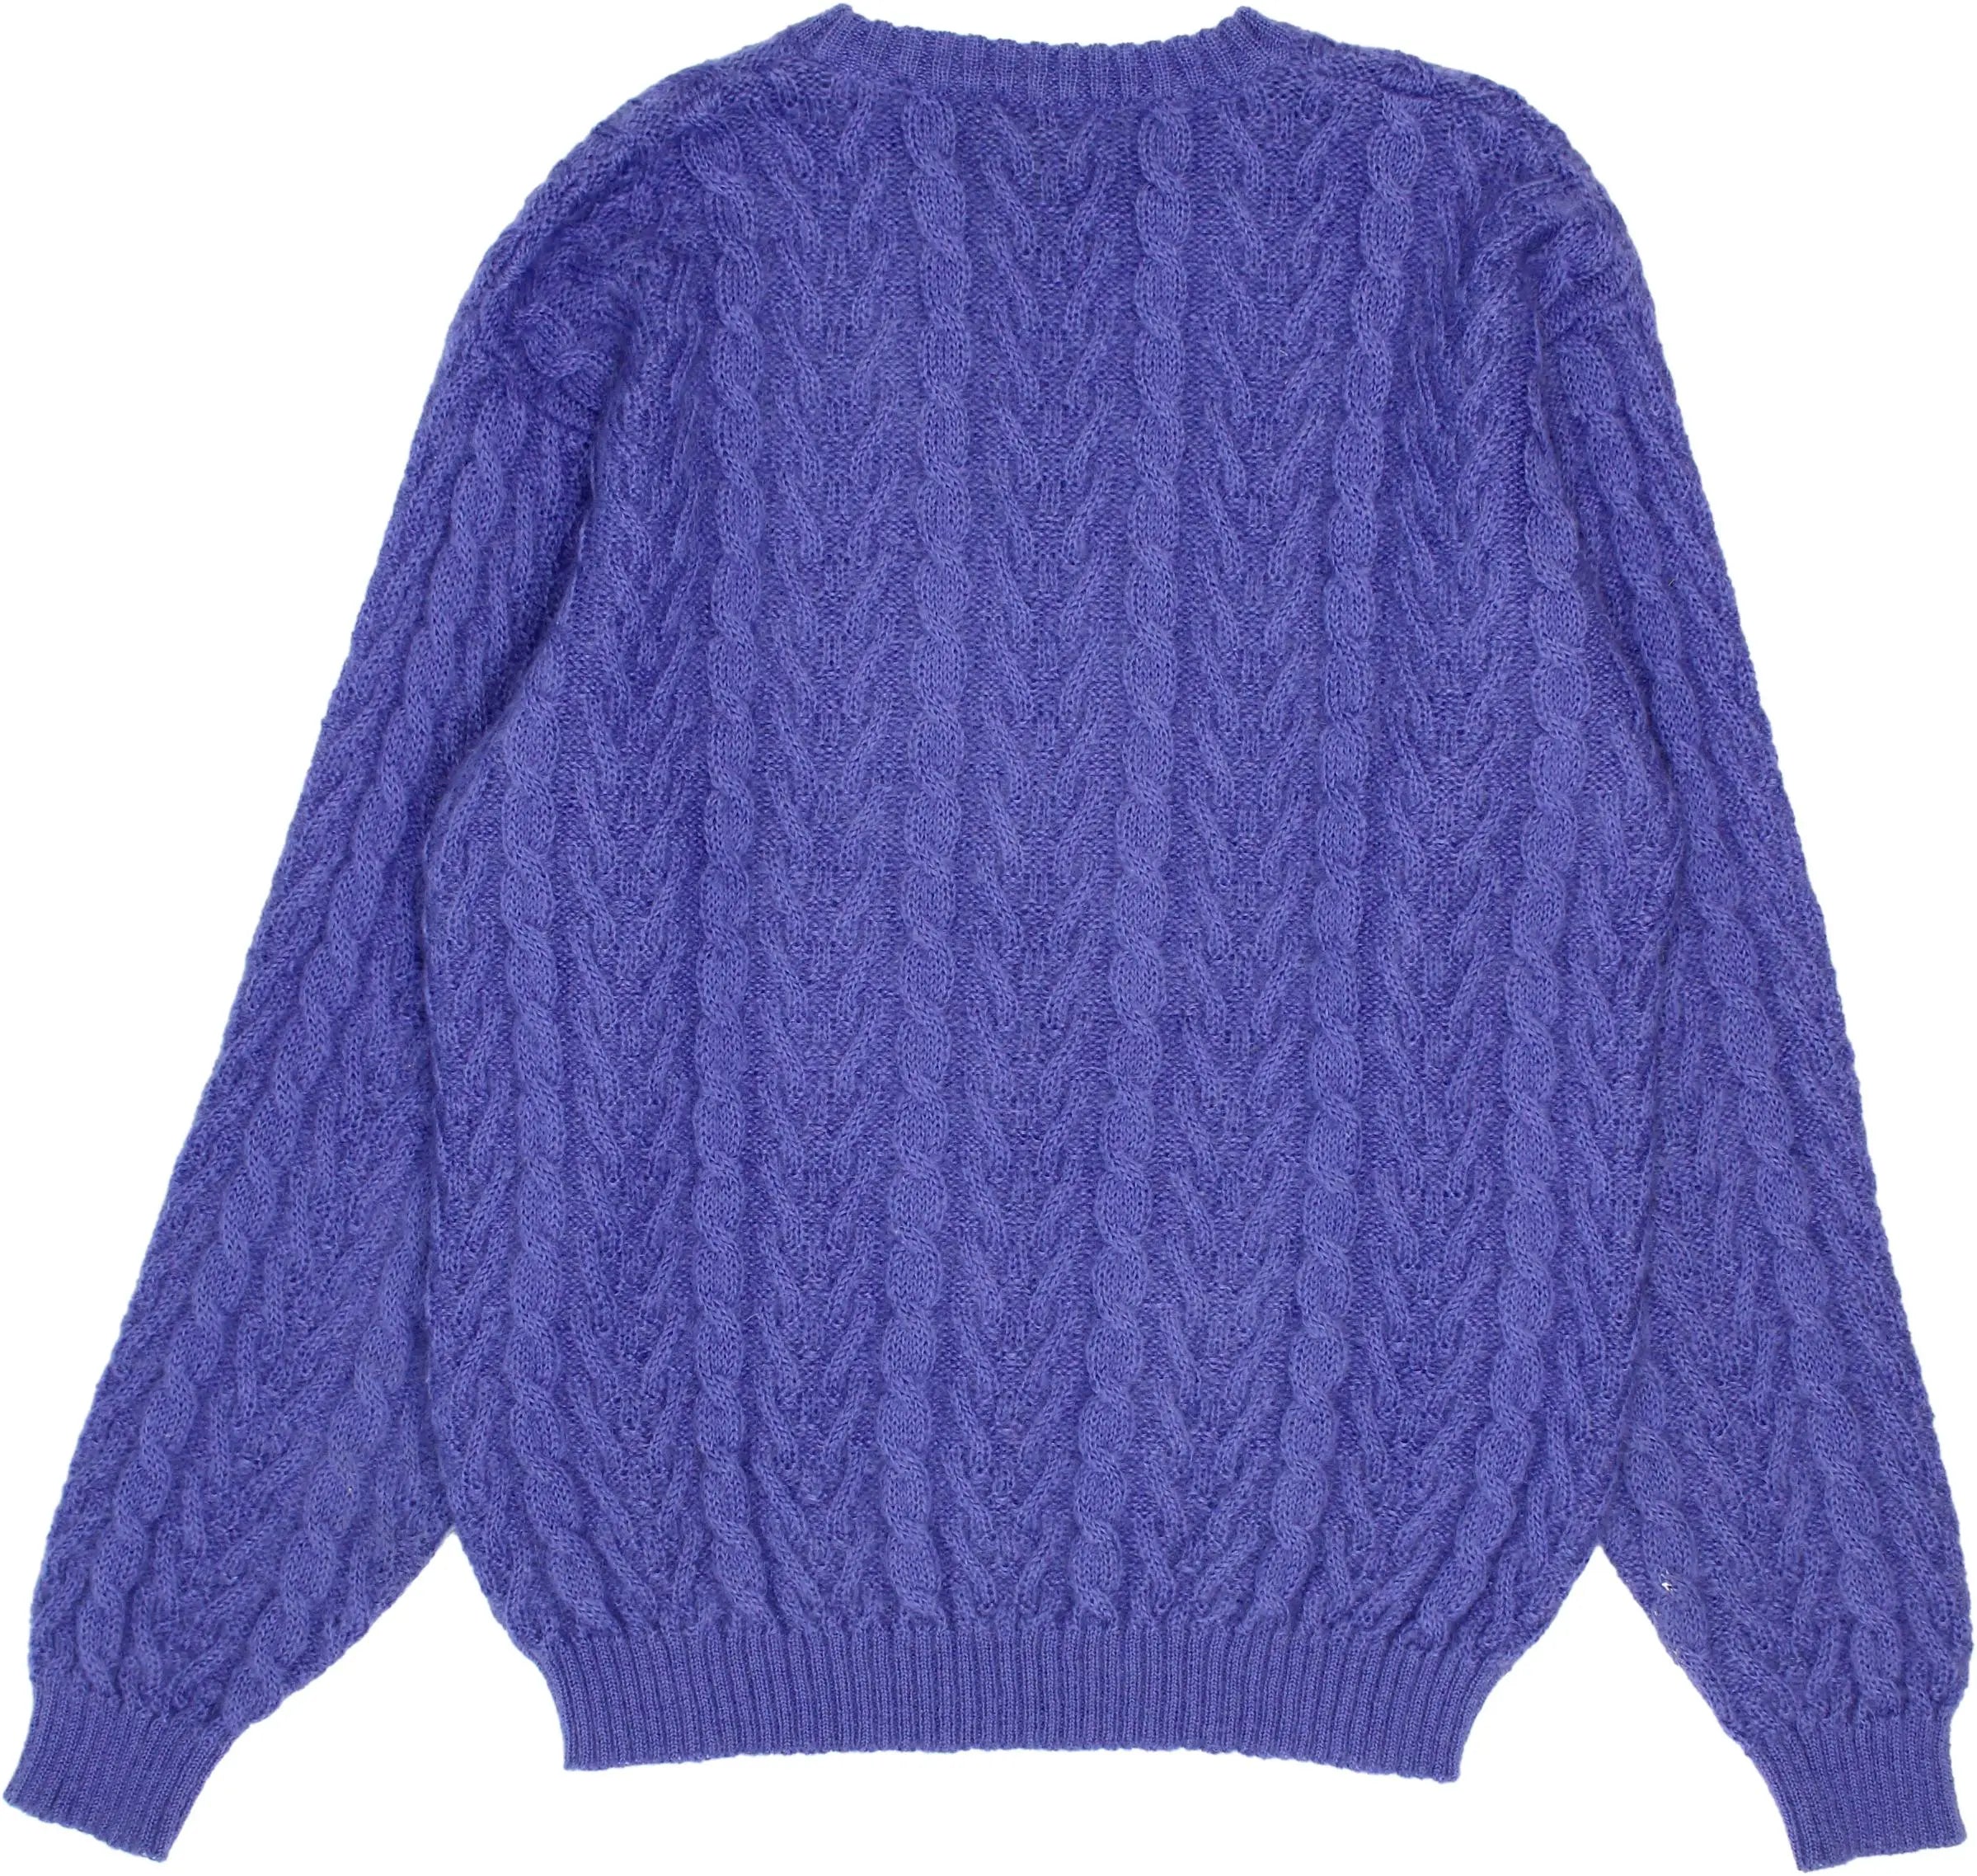 Mifra's Tricot - Knitted Jumper- ThriftTale.com - Vintage and second handclothing